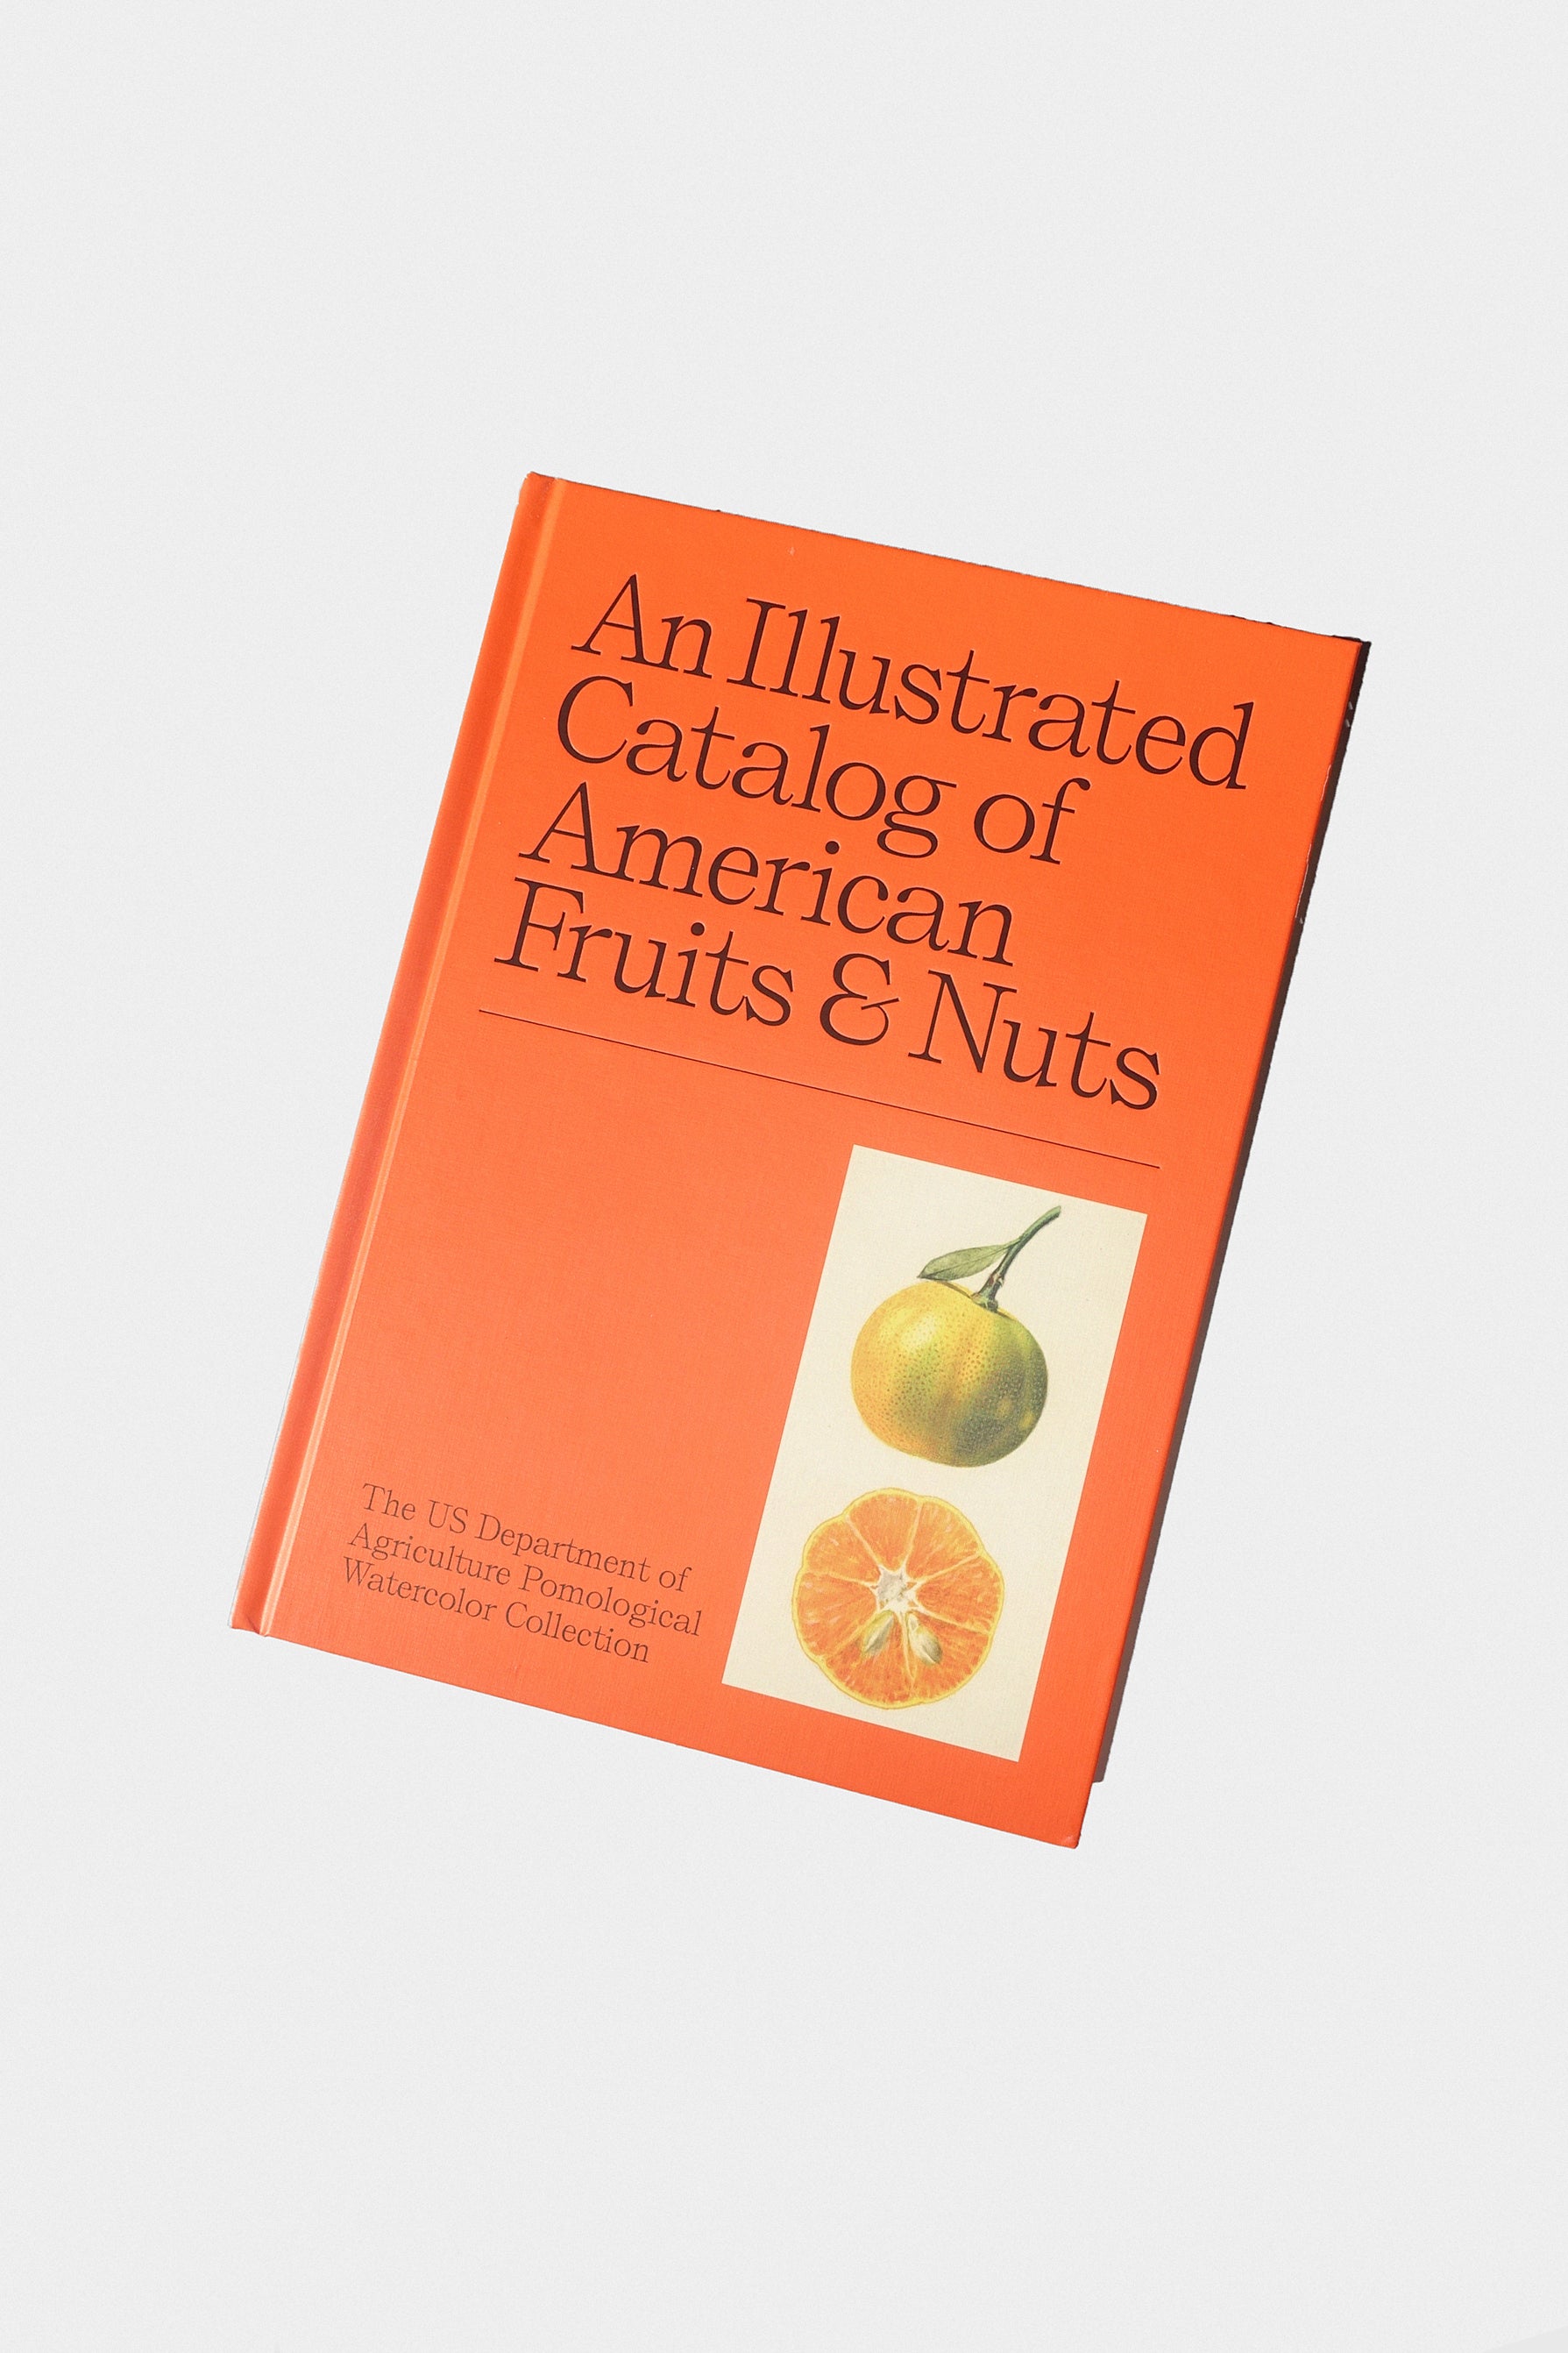 An Illustrated Catalog of American Nuts & Fruits